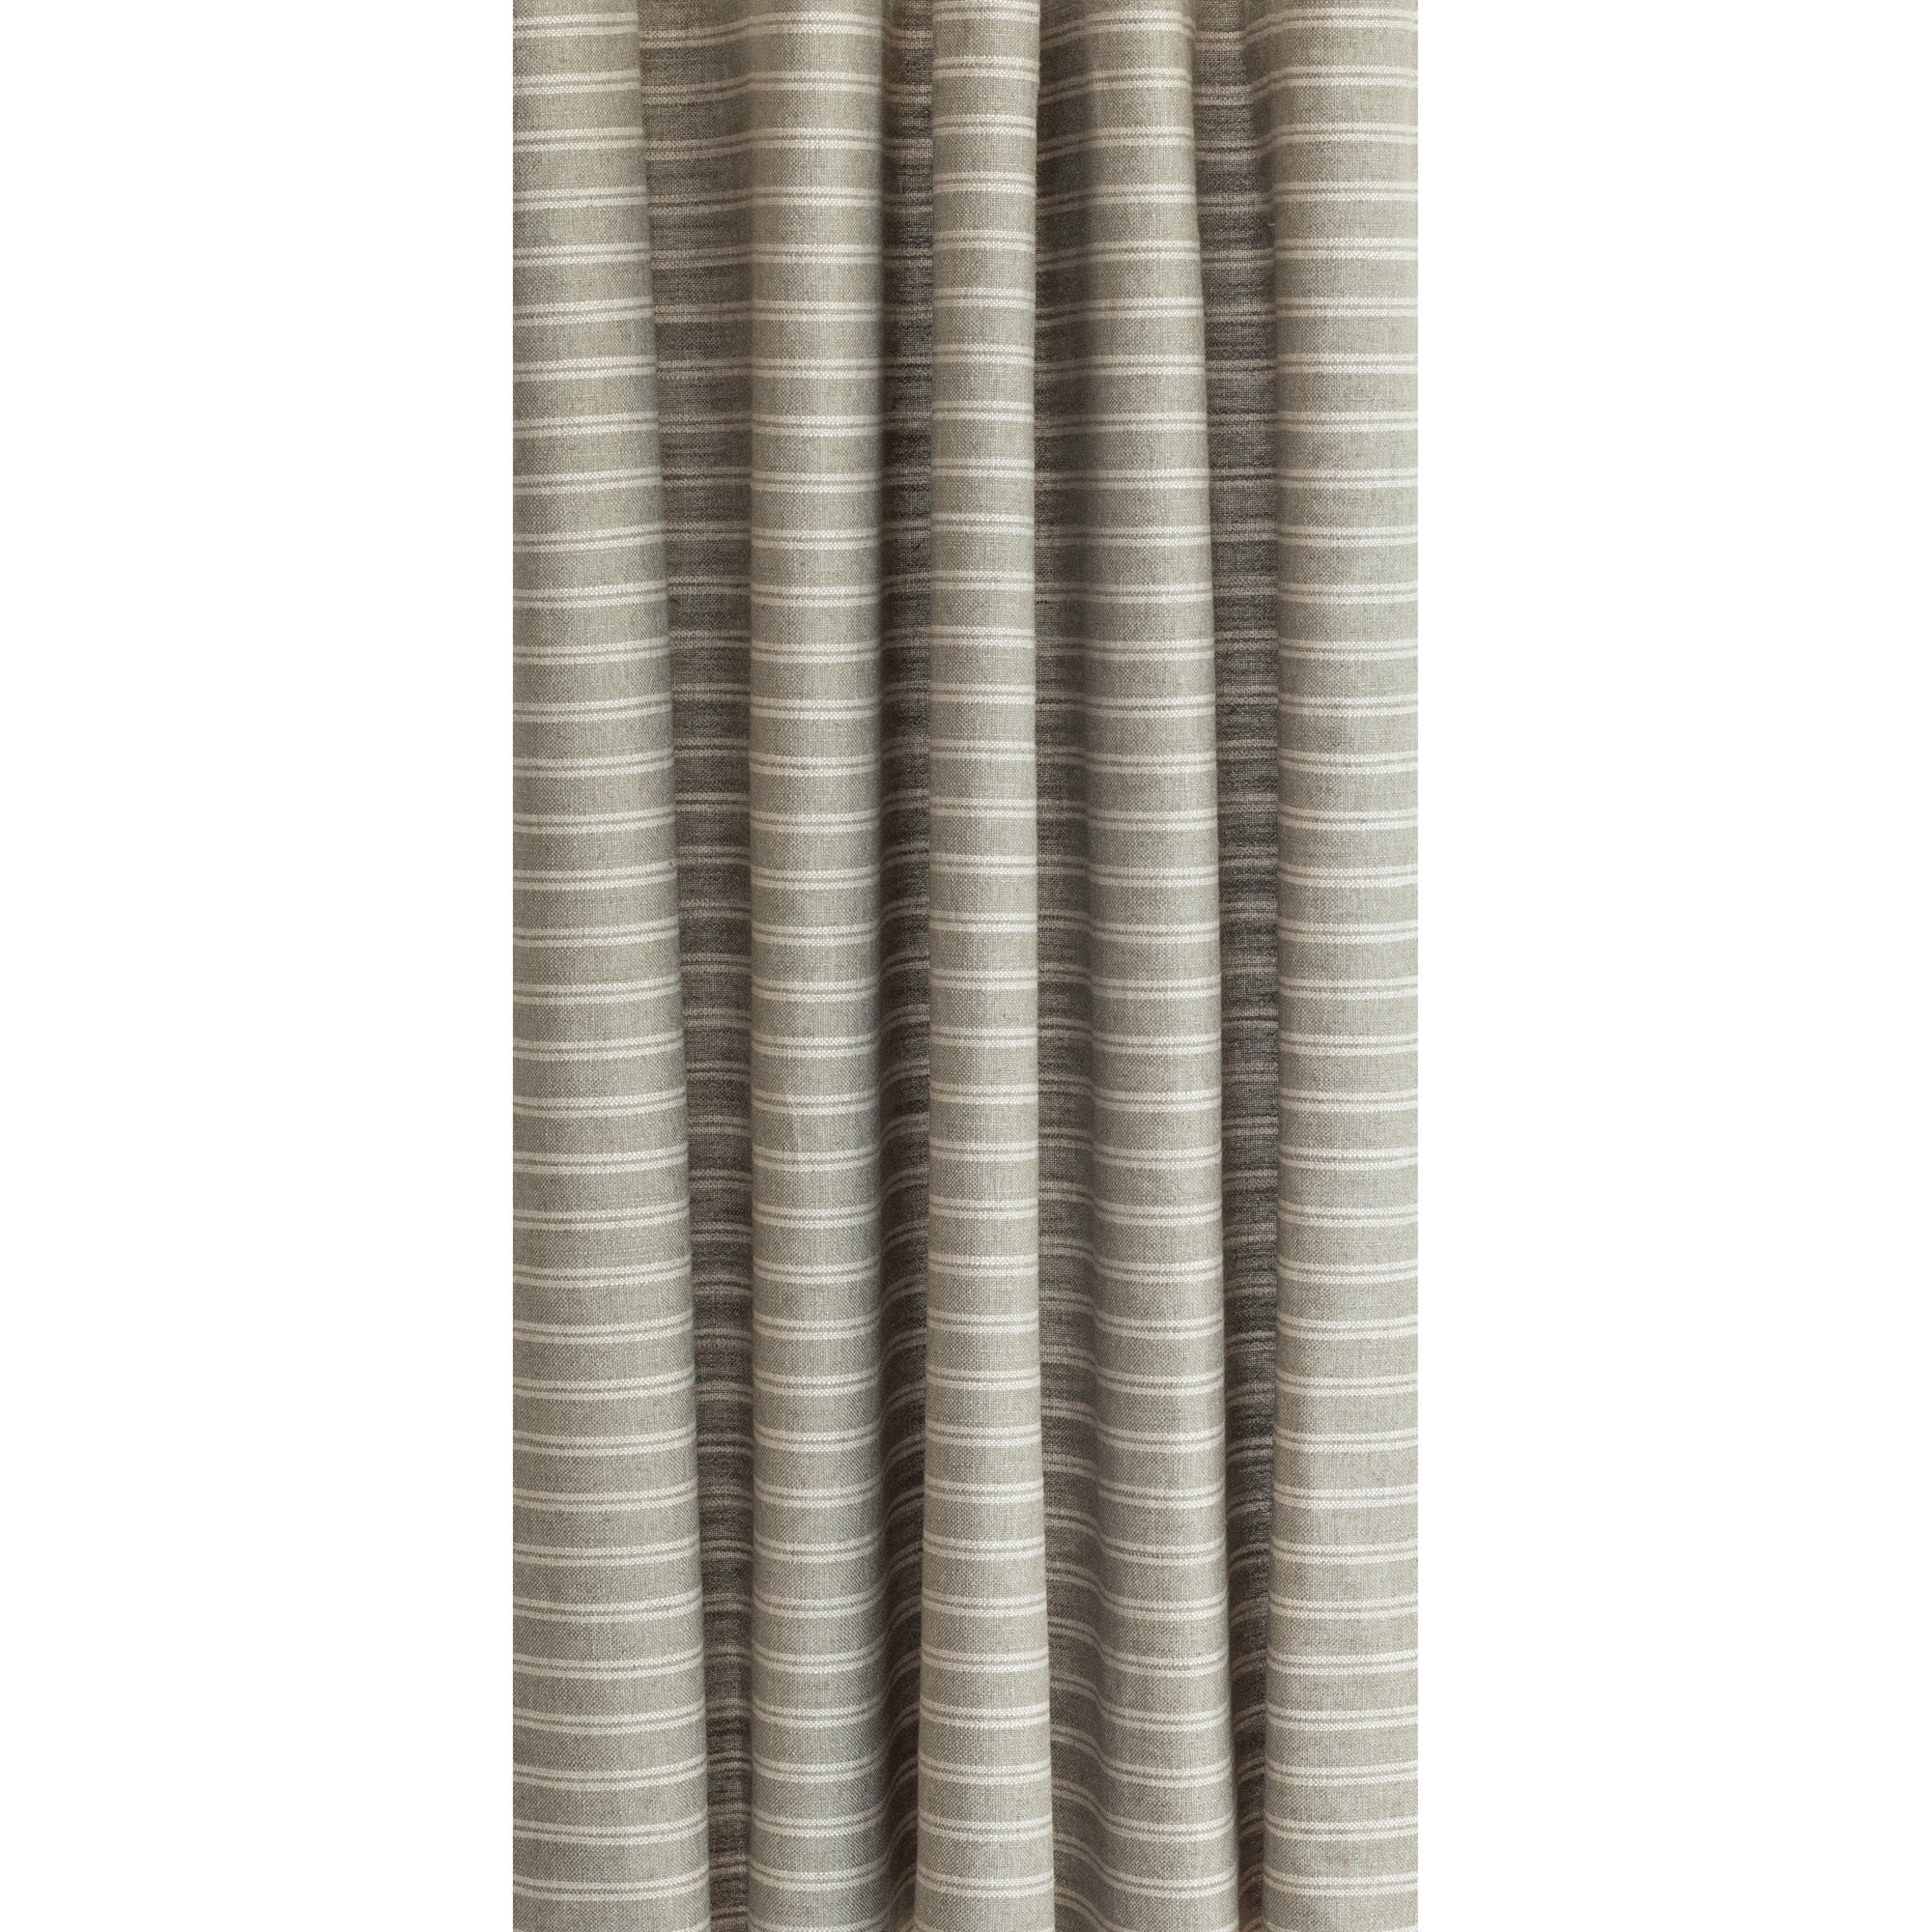 a sage green and cream horizontal stripe curtain fabric from Tonic Living